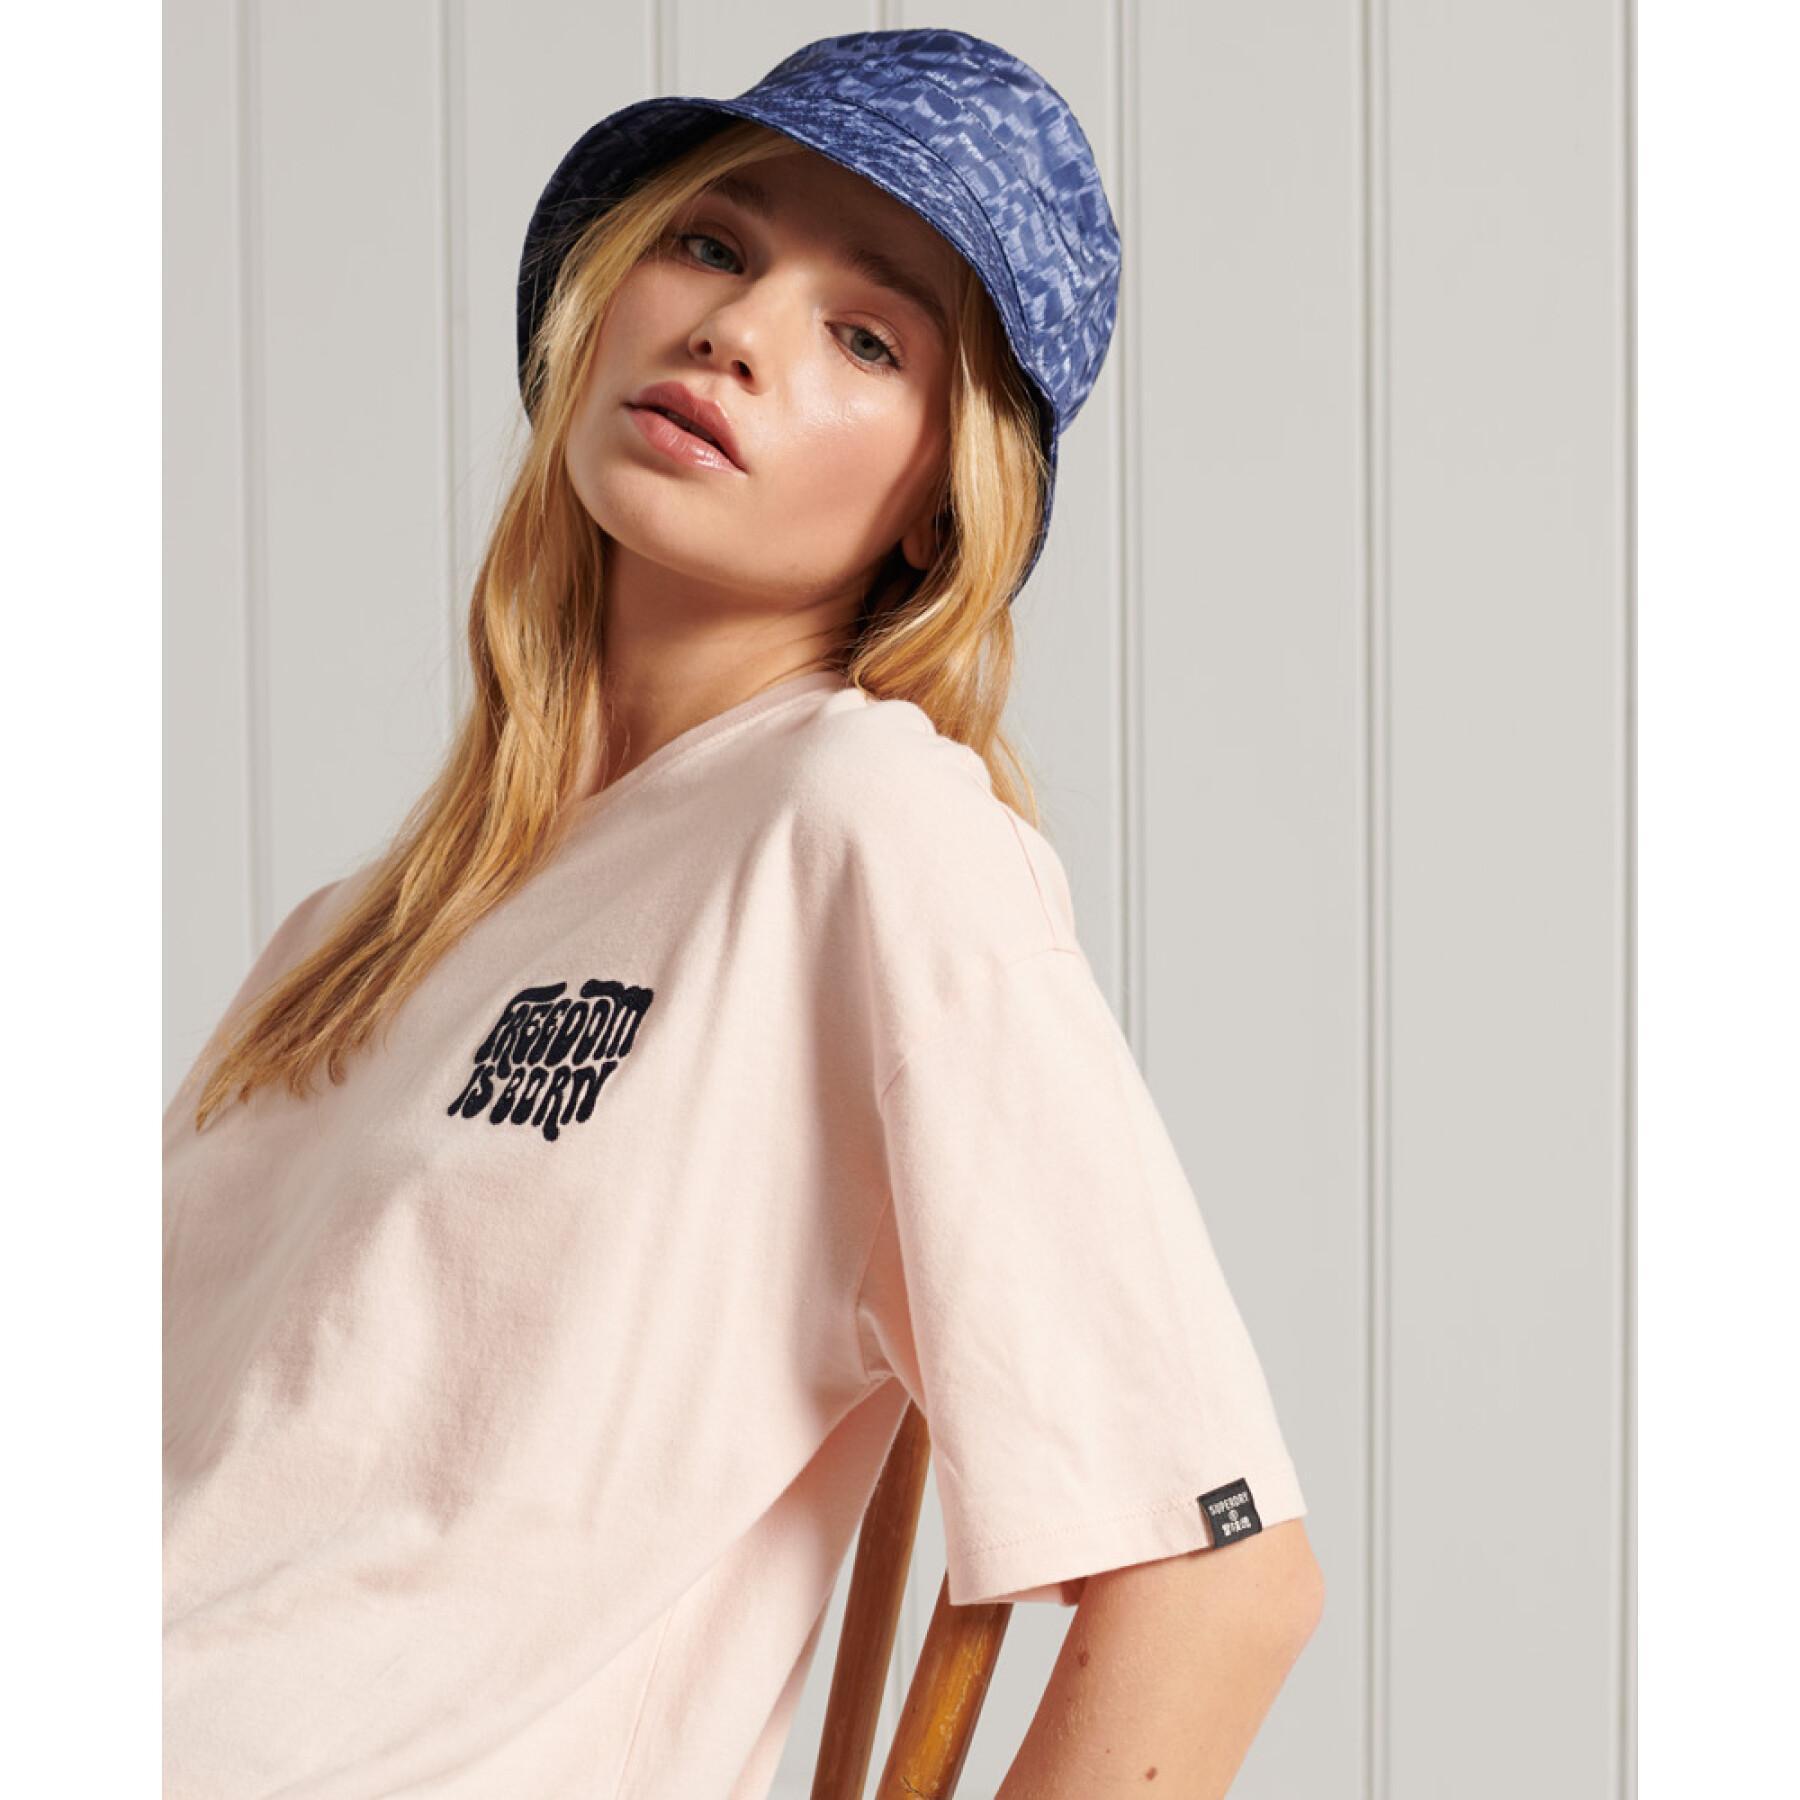 Straight military style t-shirt for women Superdry Narrative